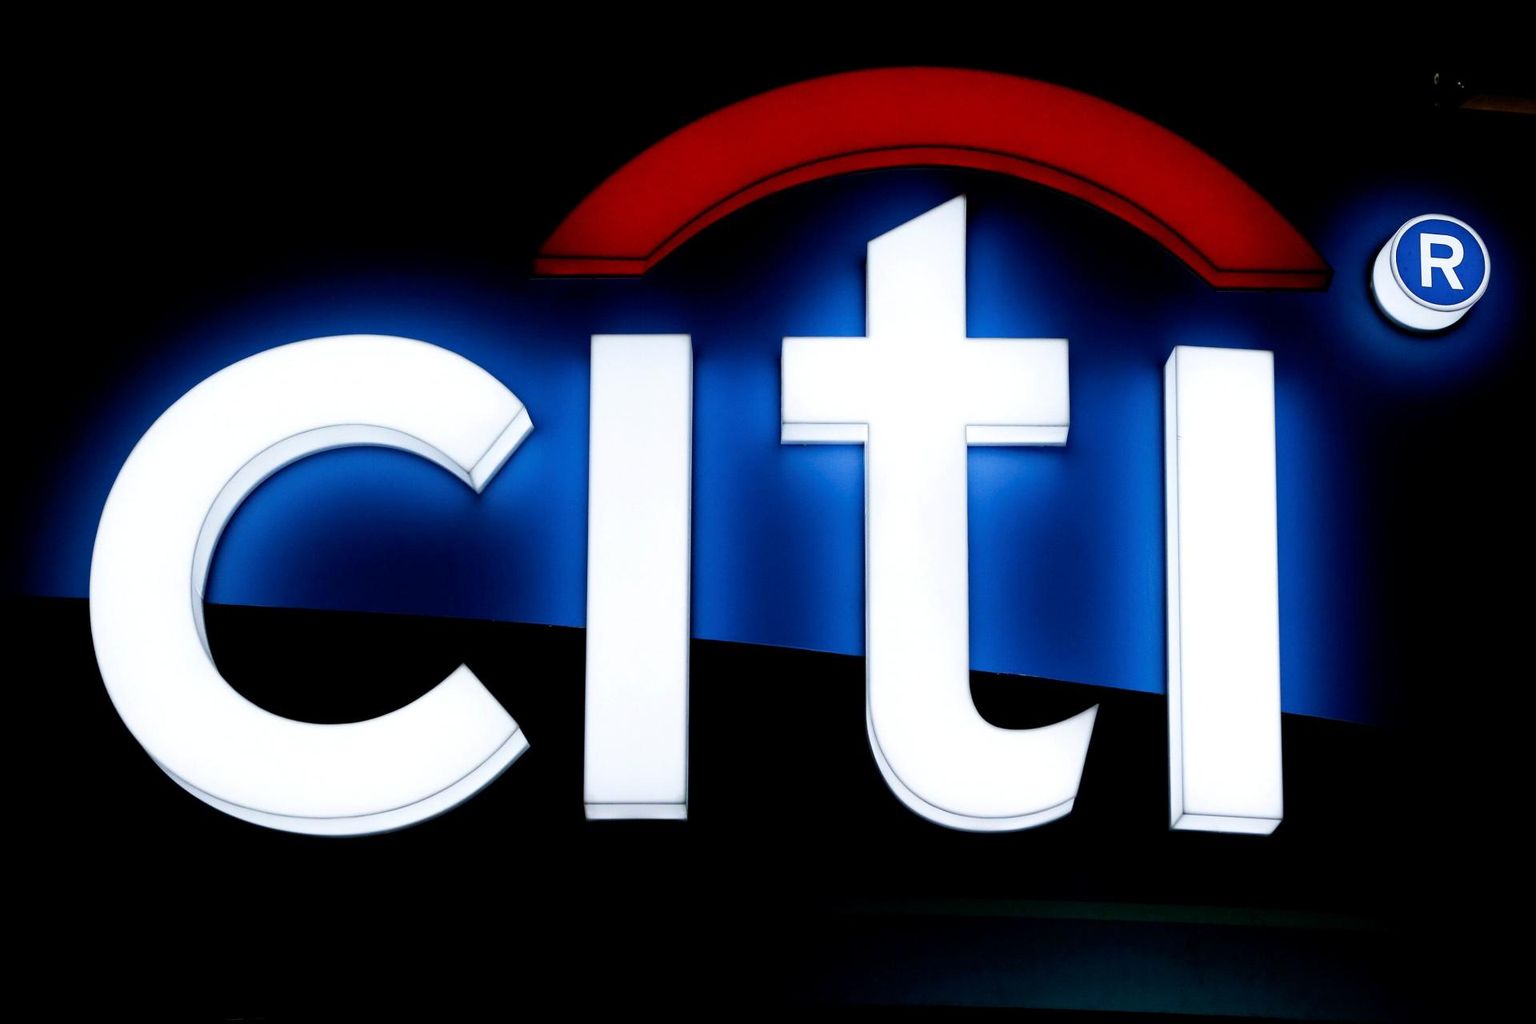 FILE PHOTO: The logo of Citibank is pictured at an exhibition hall in Bangkok, Thailand, May 12, 2016. REUTERS/Athit Perawongmetha -/File Photo FOTO: Athit Perawongmetha/reuters